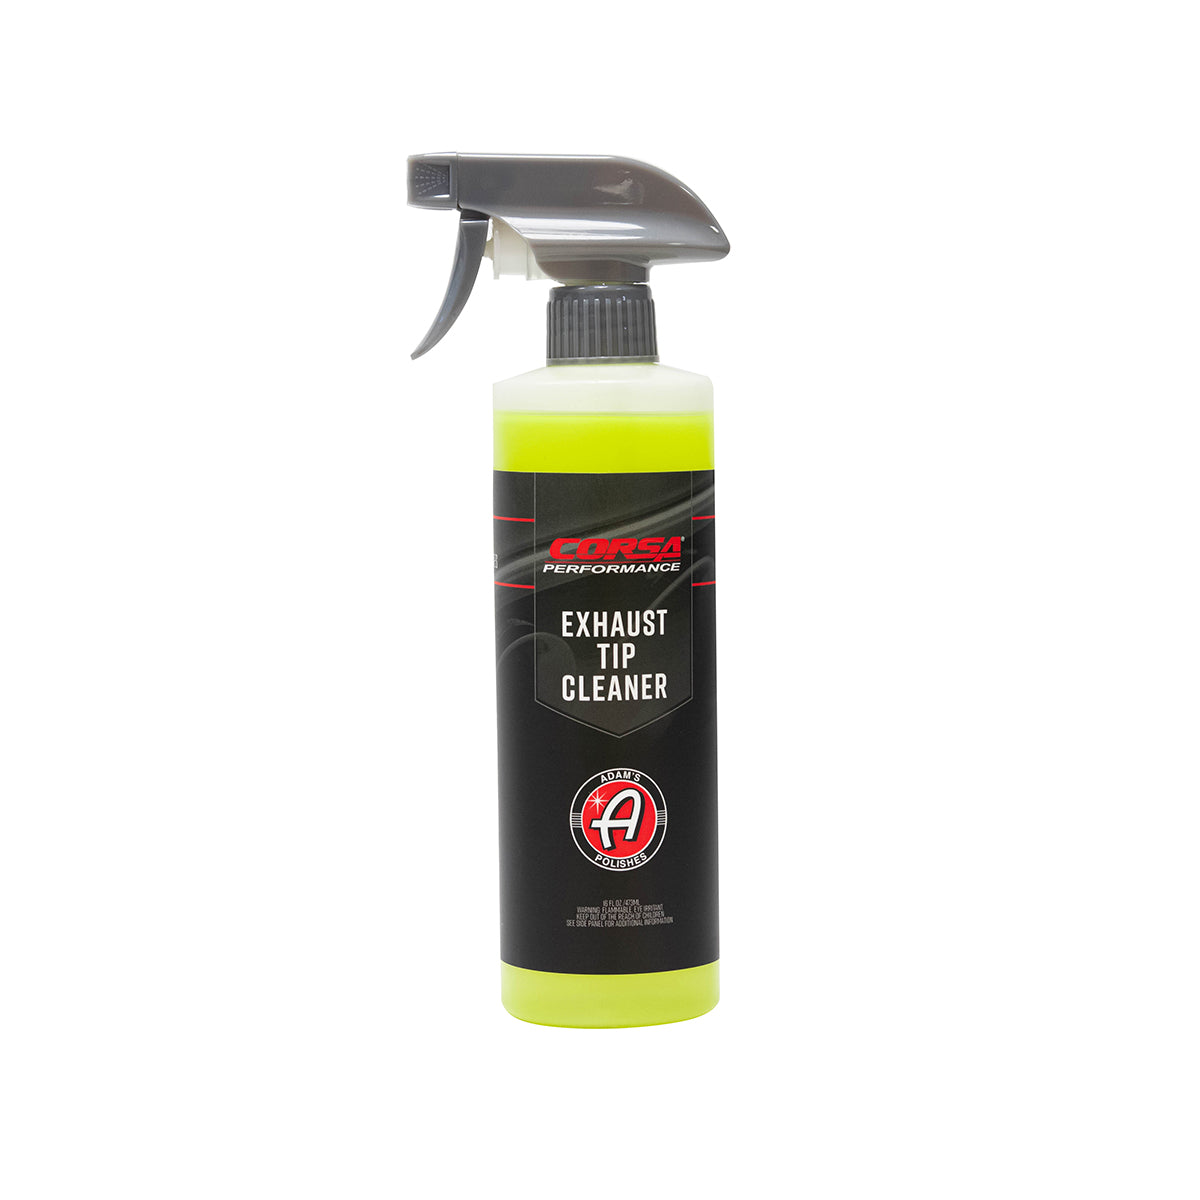 EXHAUST SYSTEM CLEANER (14091) 16 FL OZ